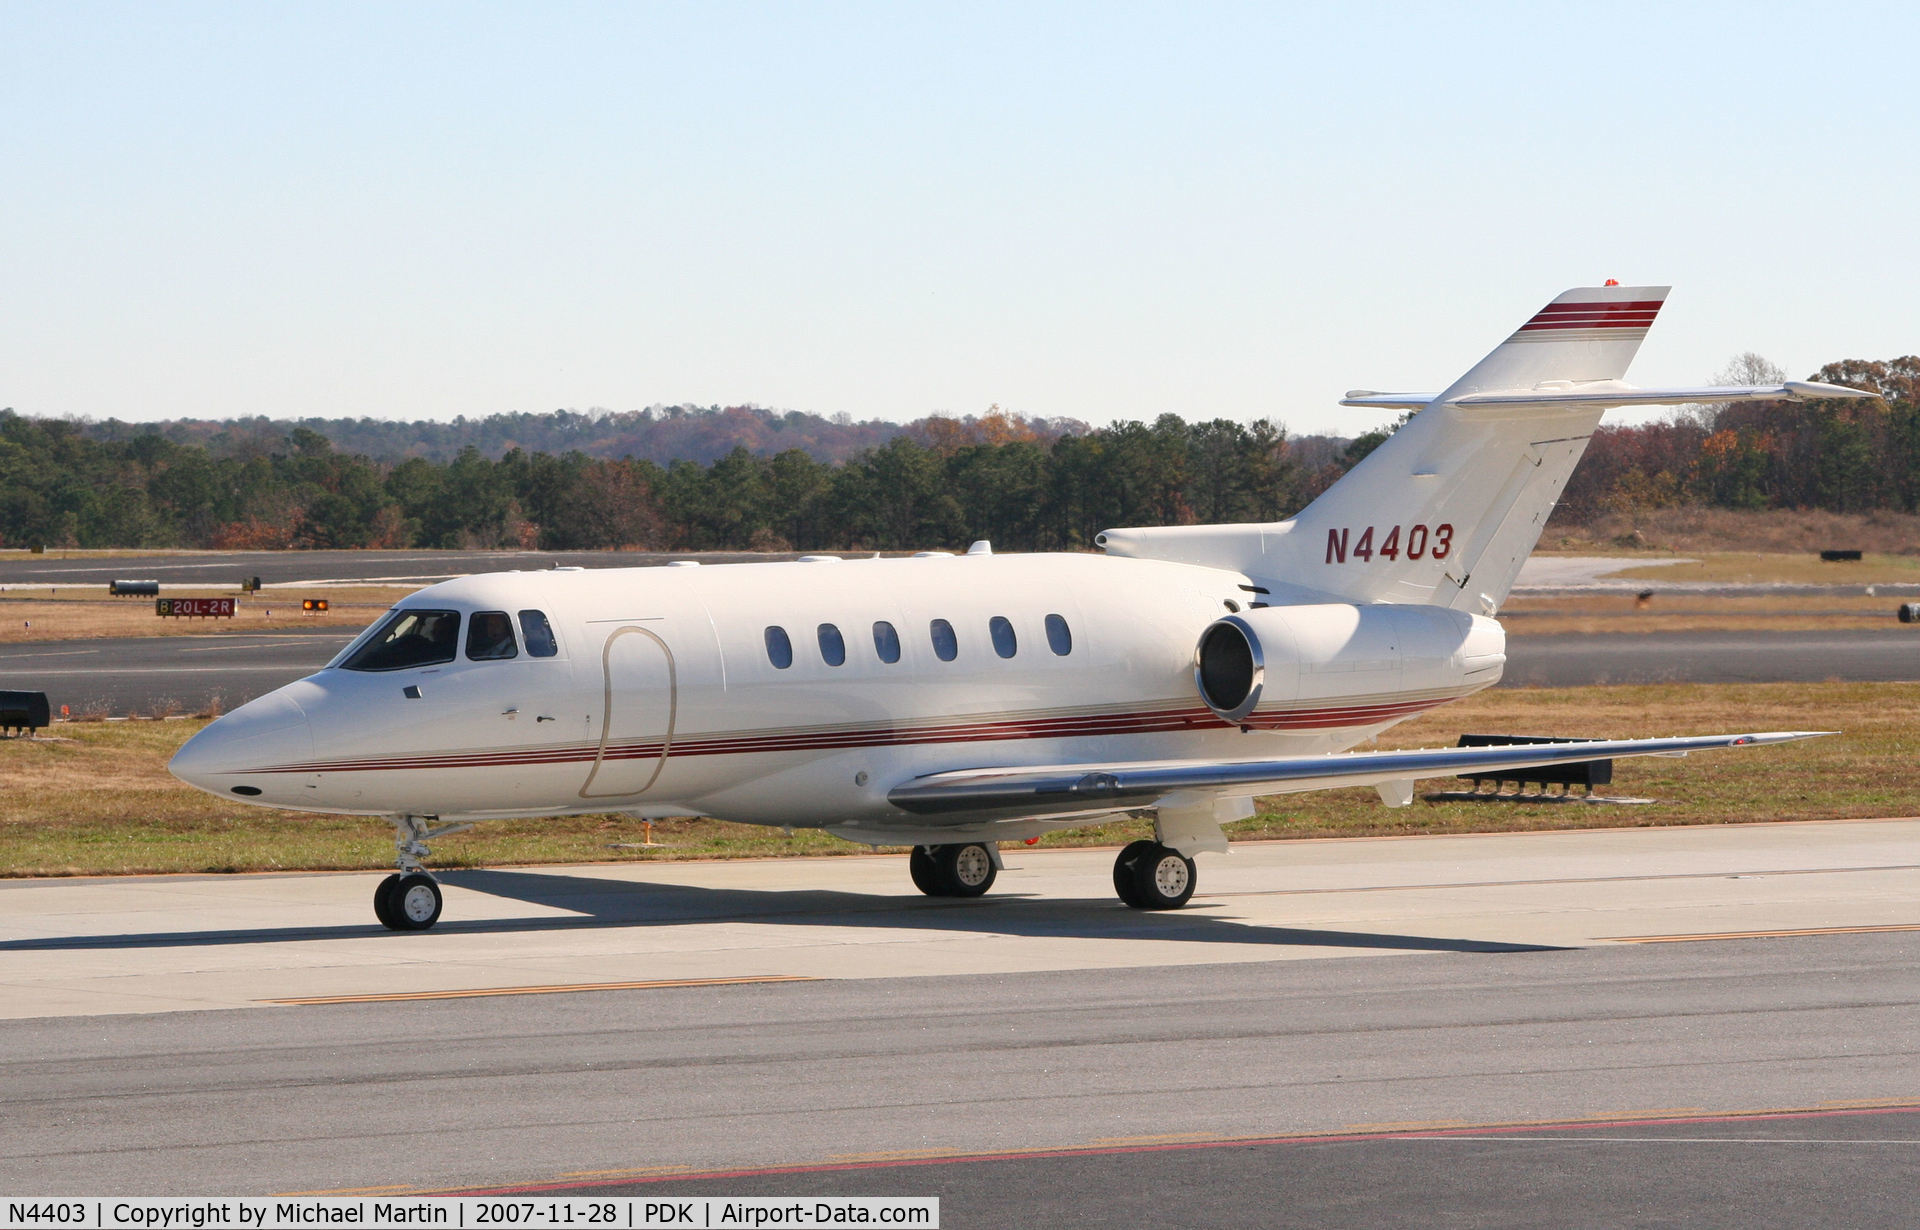 N4403, 2000 Raytheon Hawker 800XP C/N 258480, Taxing to Epps Air Service